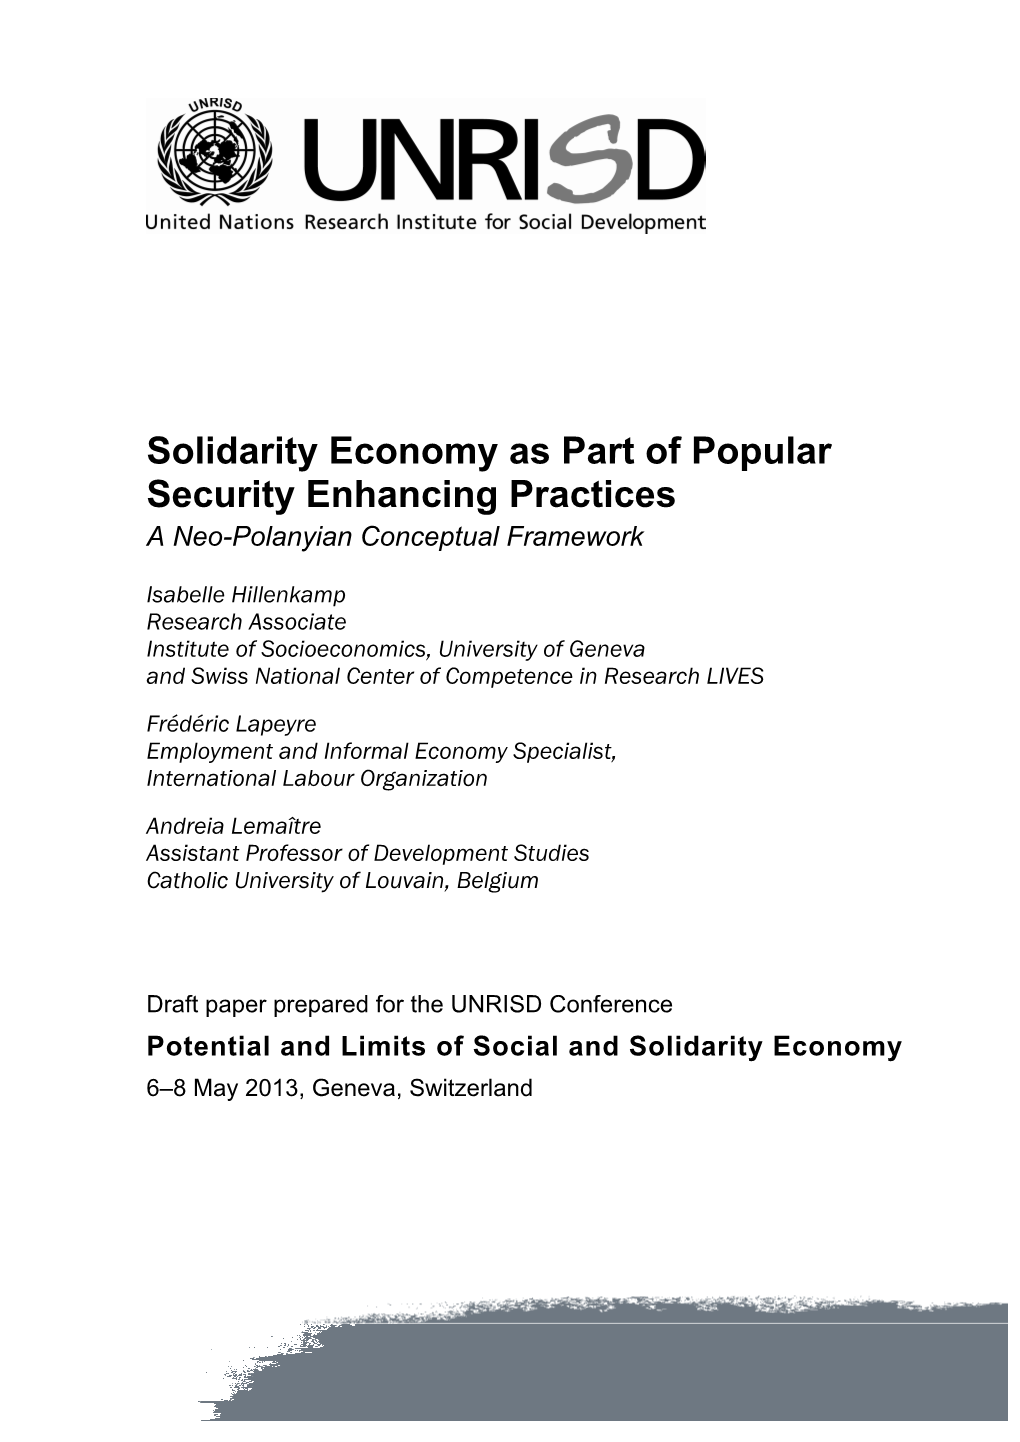 Solidarity Economy As Part of Popular Security Enhancing Practices a Neo-Polanyian Conceptual Framework